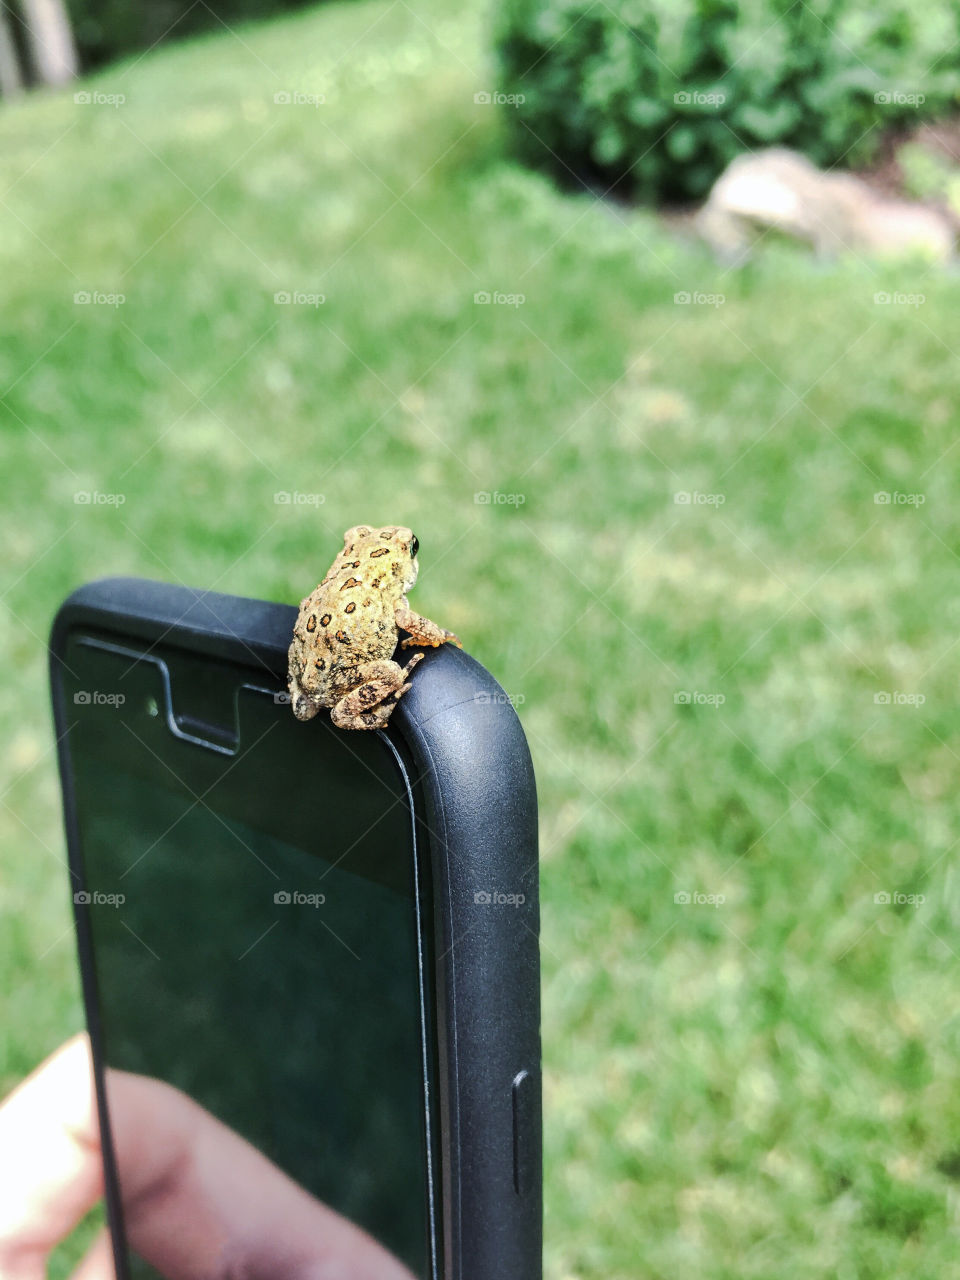 Frog Perched on Phone